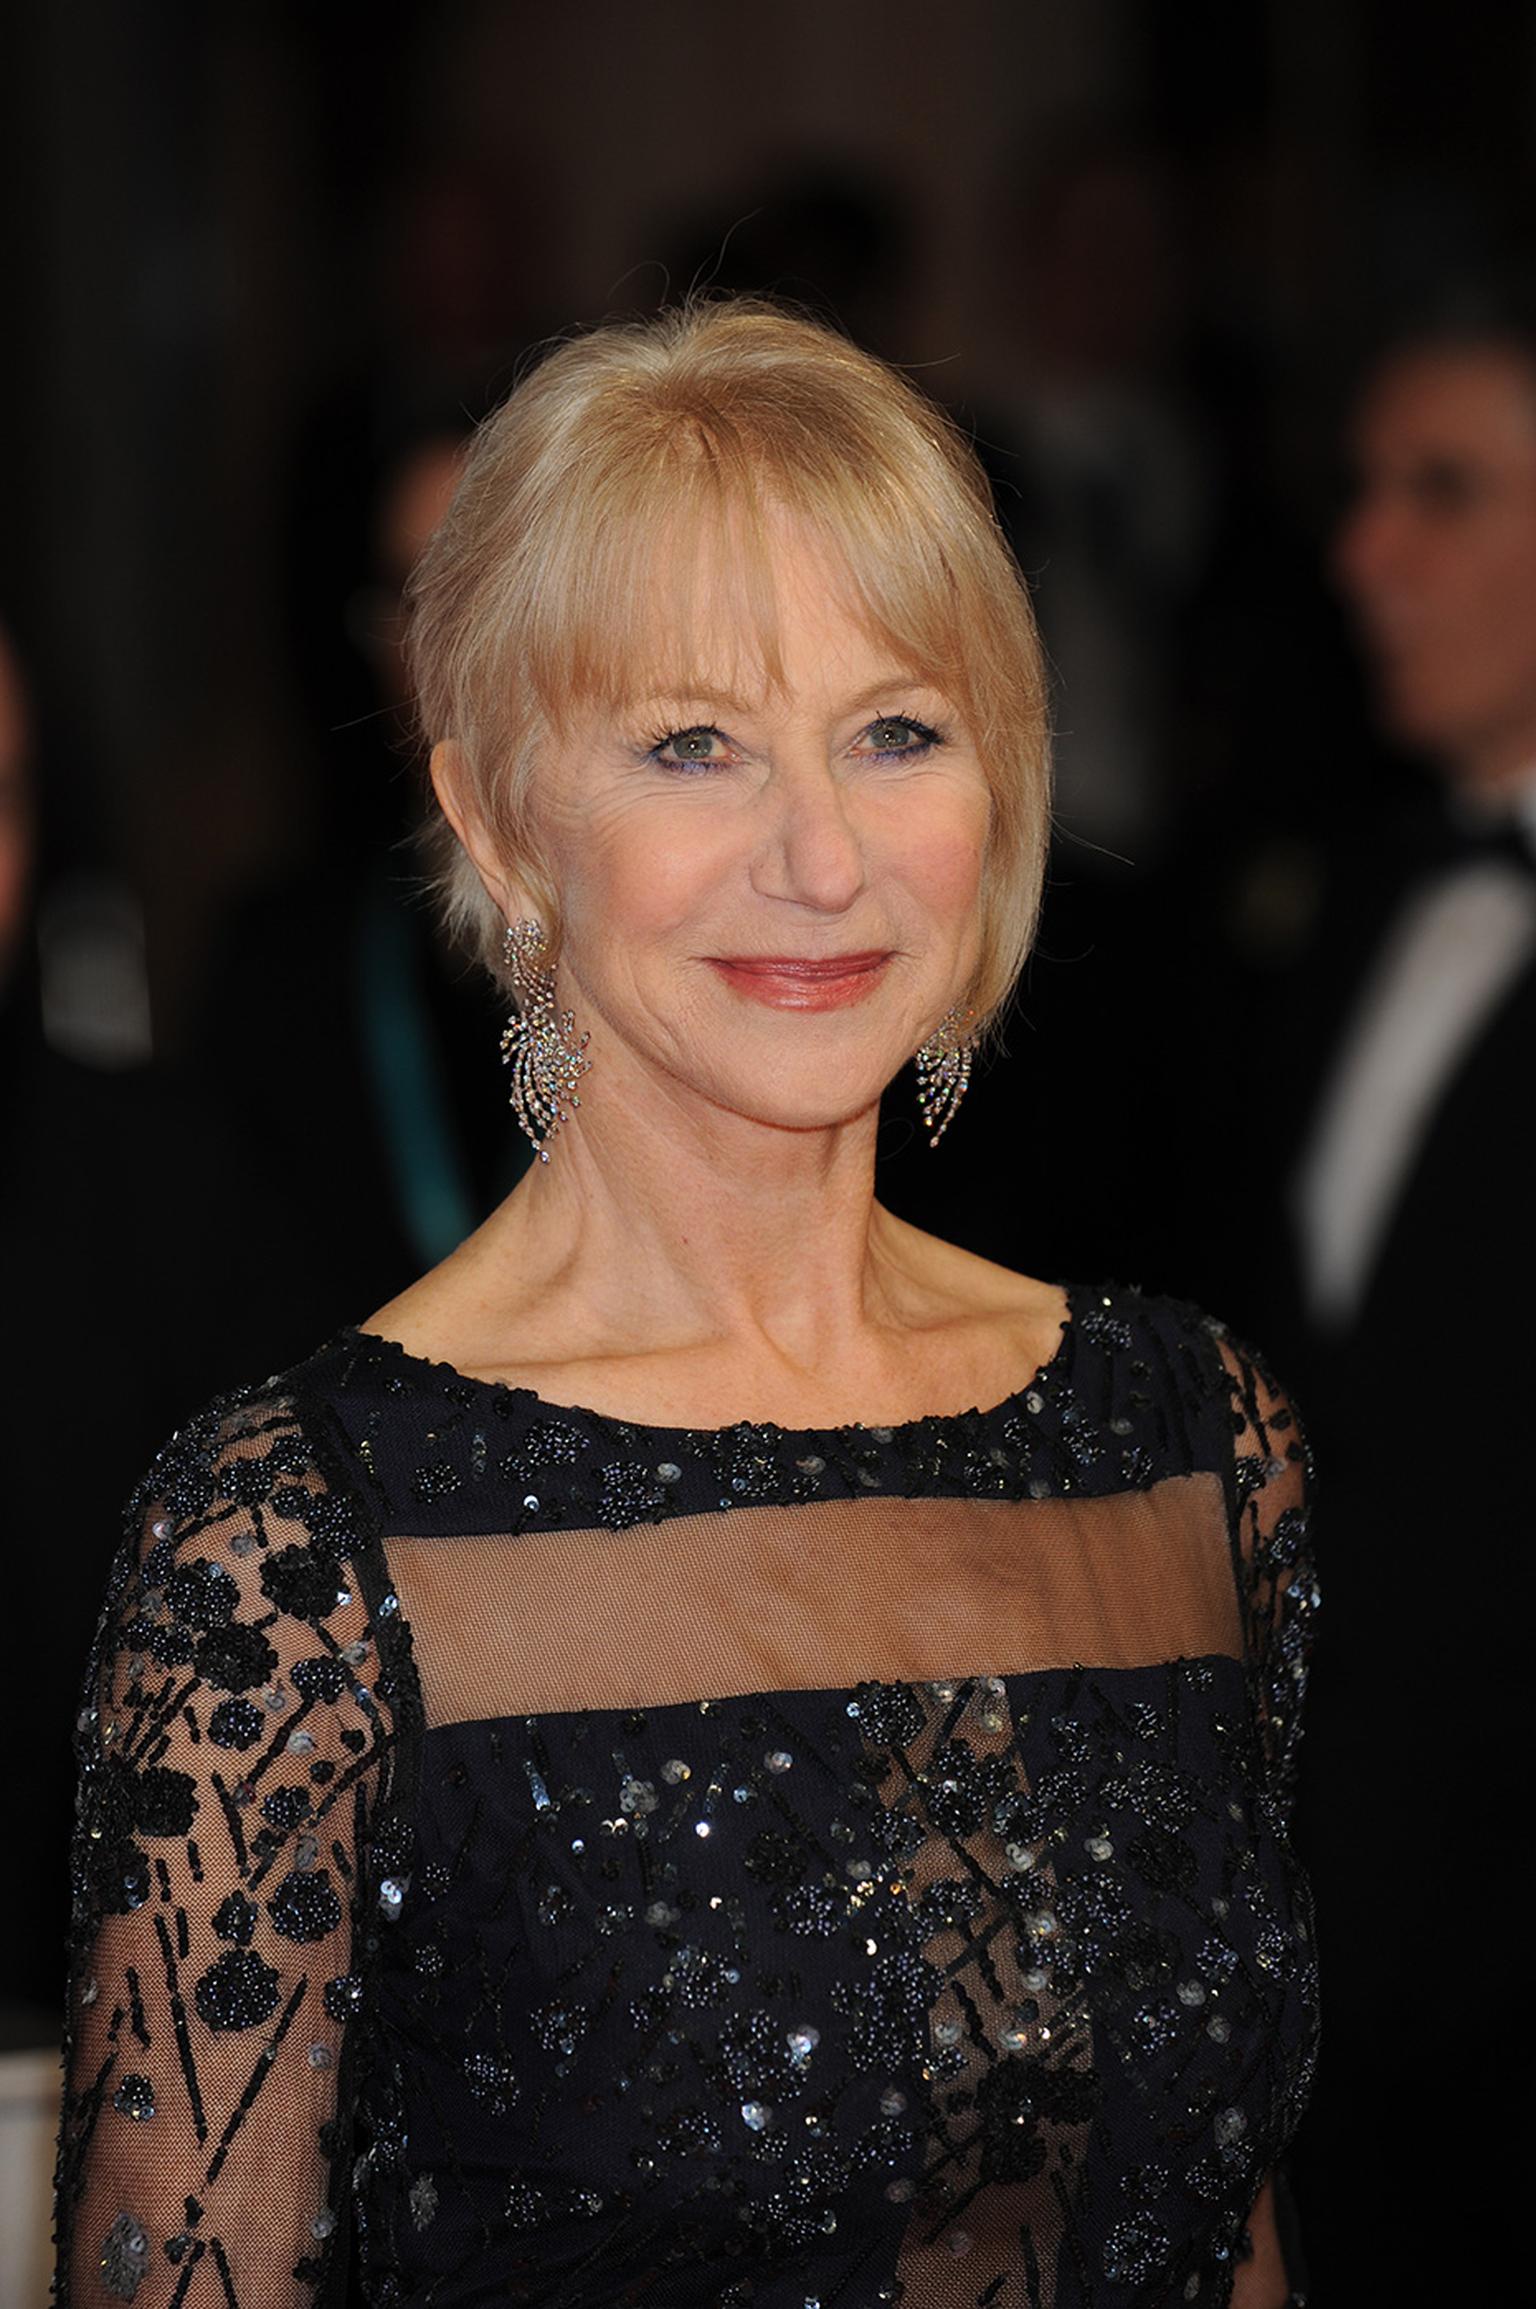 Actress Helen Mirren chose to wear the light-as-air Asprey Storm collection earrings to the 2014 BAFTAs.